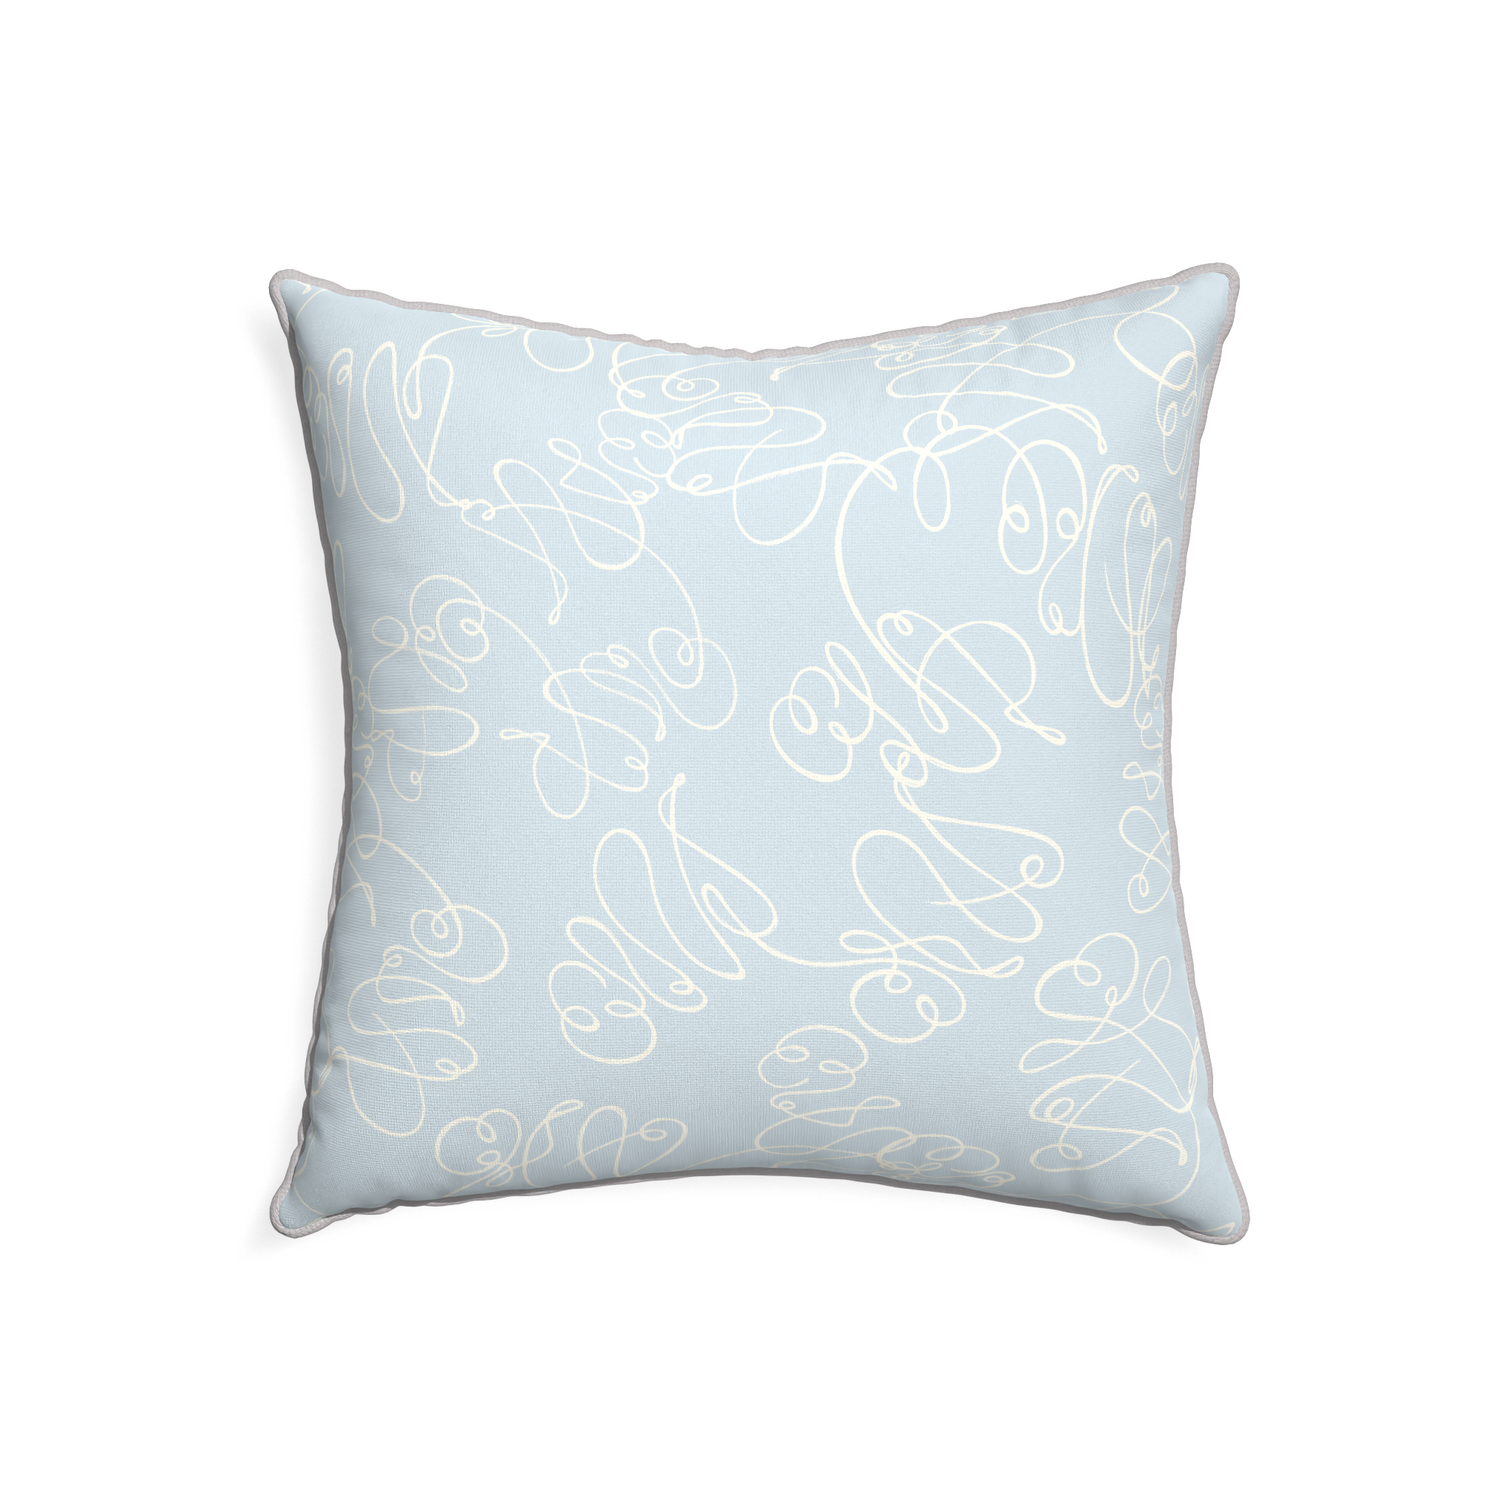 22-square mirabella custom powder blue abstractpillow with pebble piping on white background